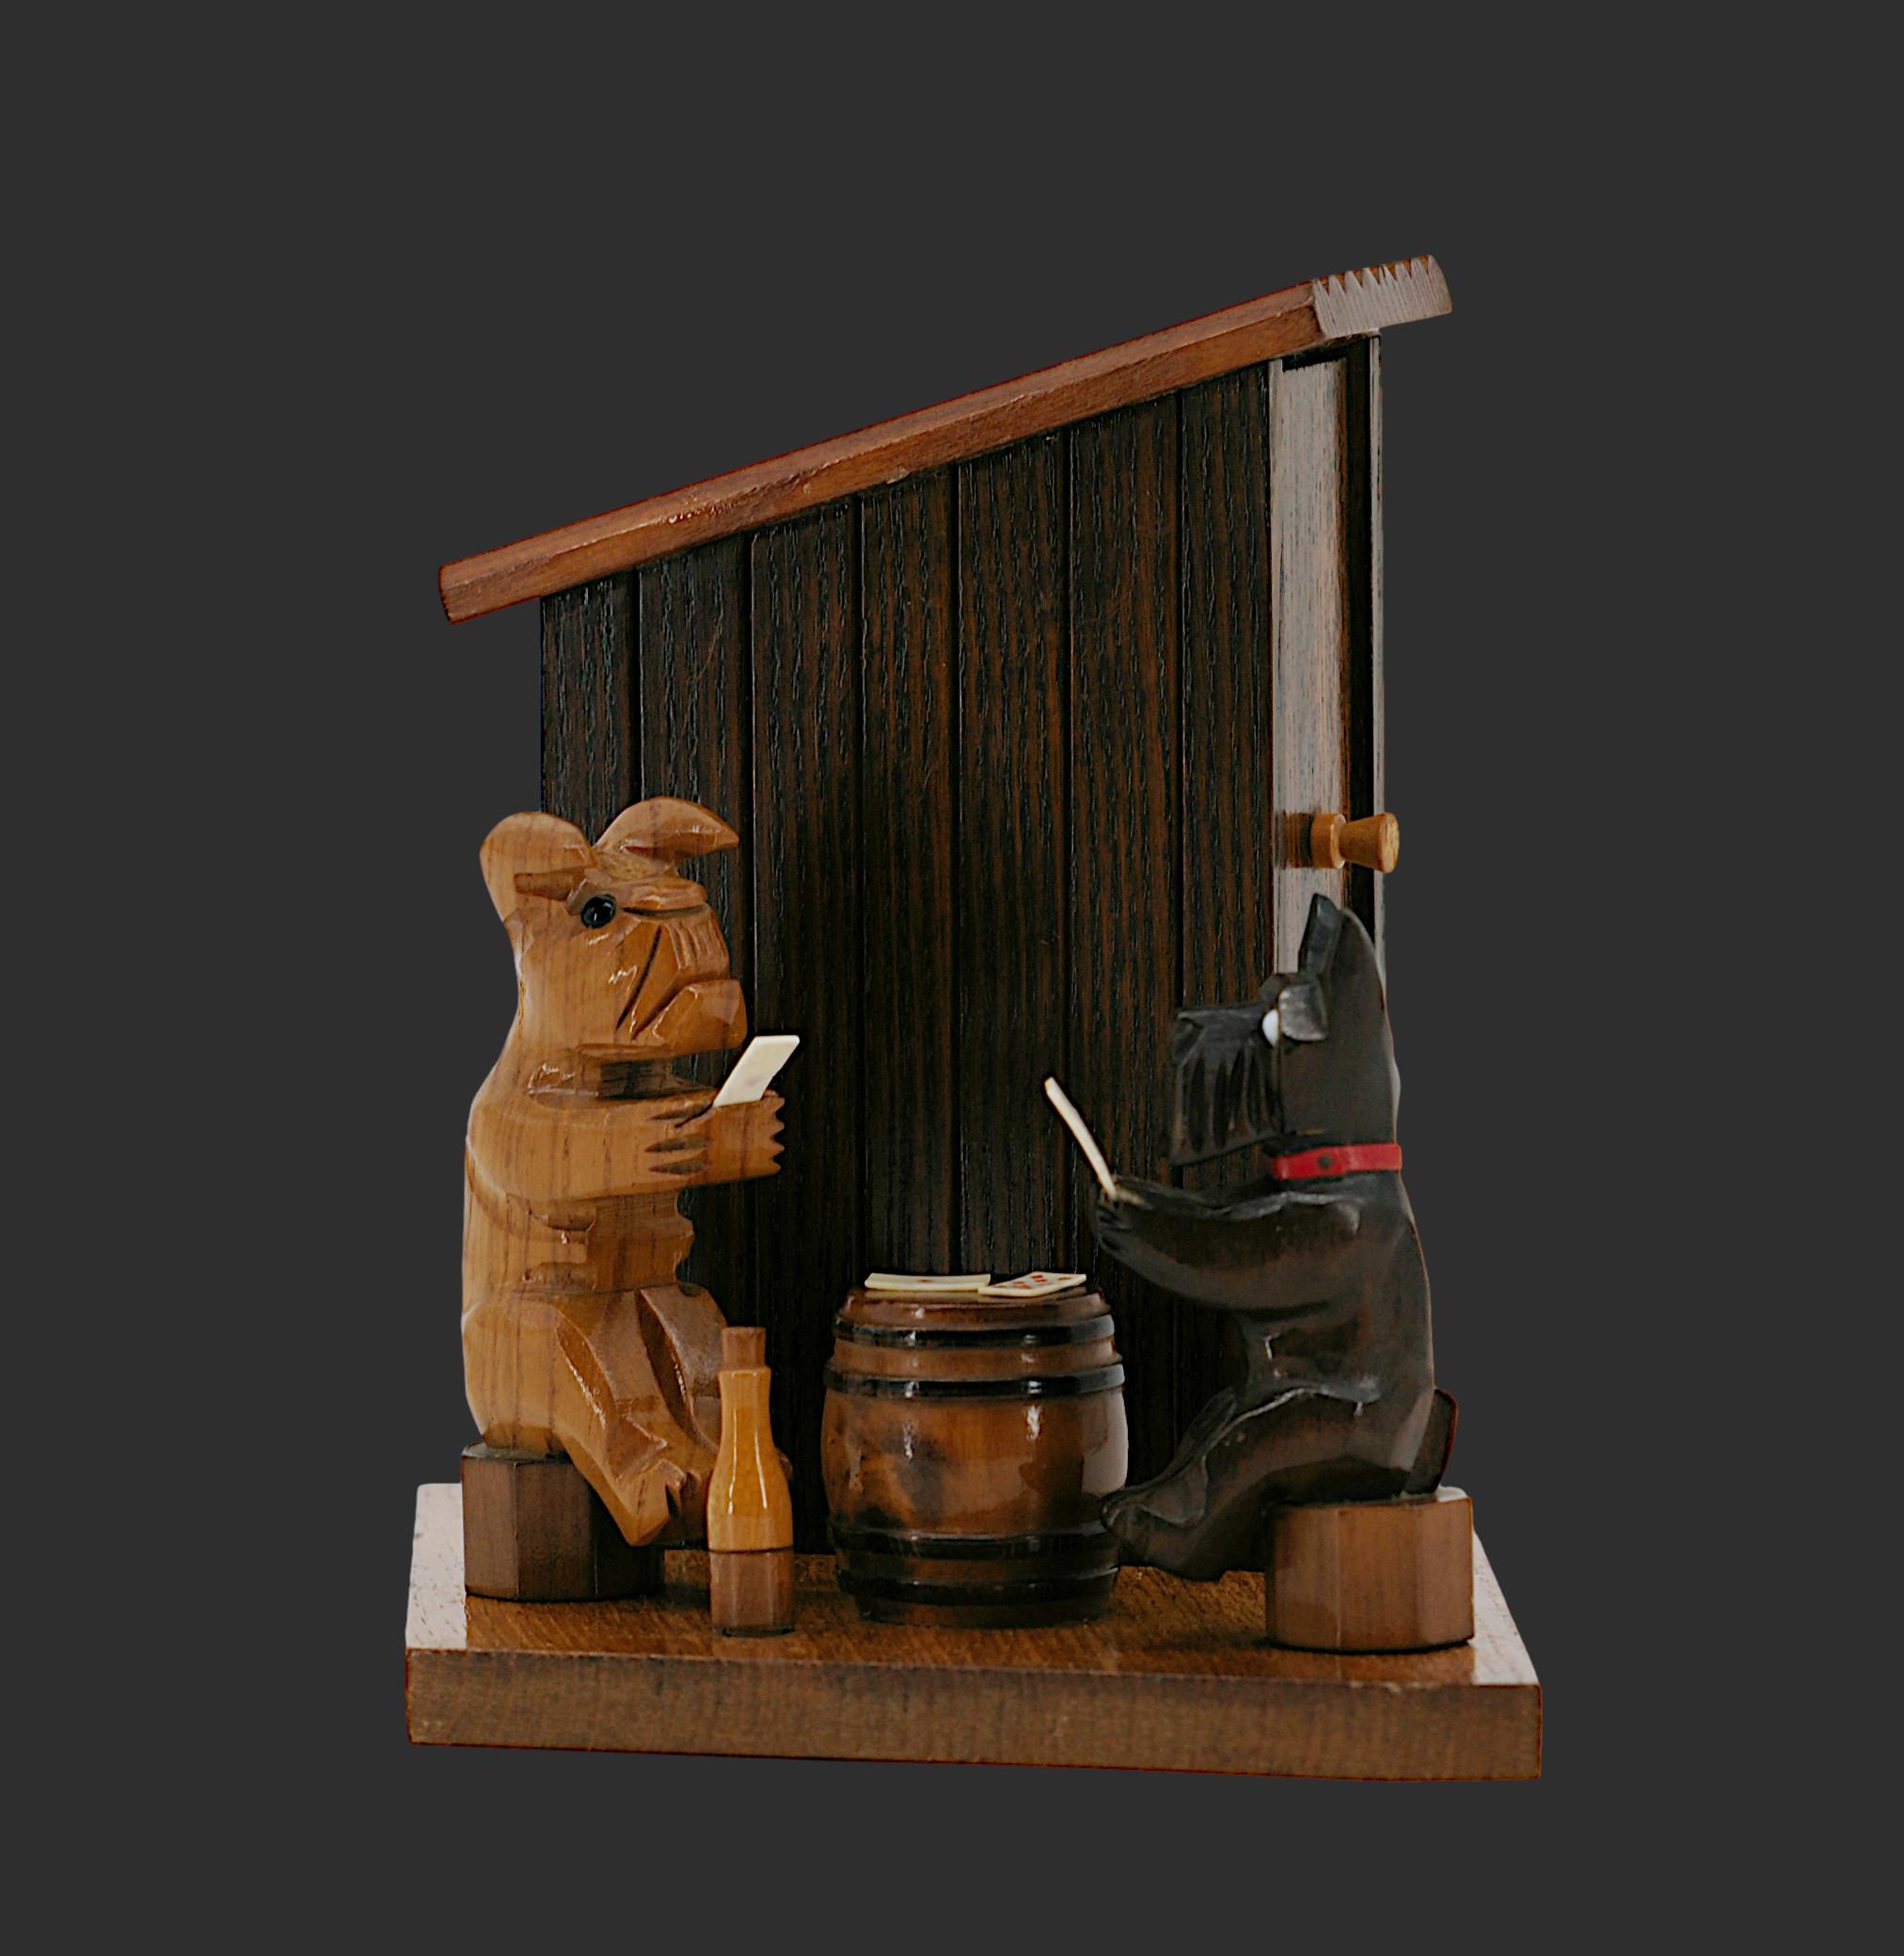 Mid-century Bulldog & Scottish Terrier cigarette box, France, 1950's. Dogs playing cards. Wood and bakelite. Bakelite cards. Glass eyes. Capacity of 20 cigarettes. Measures: Height: 7